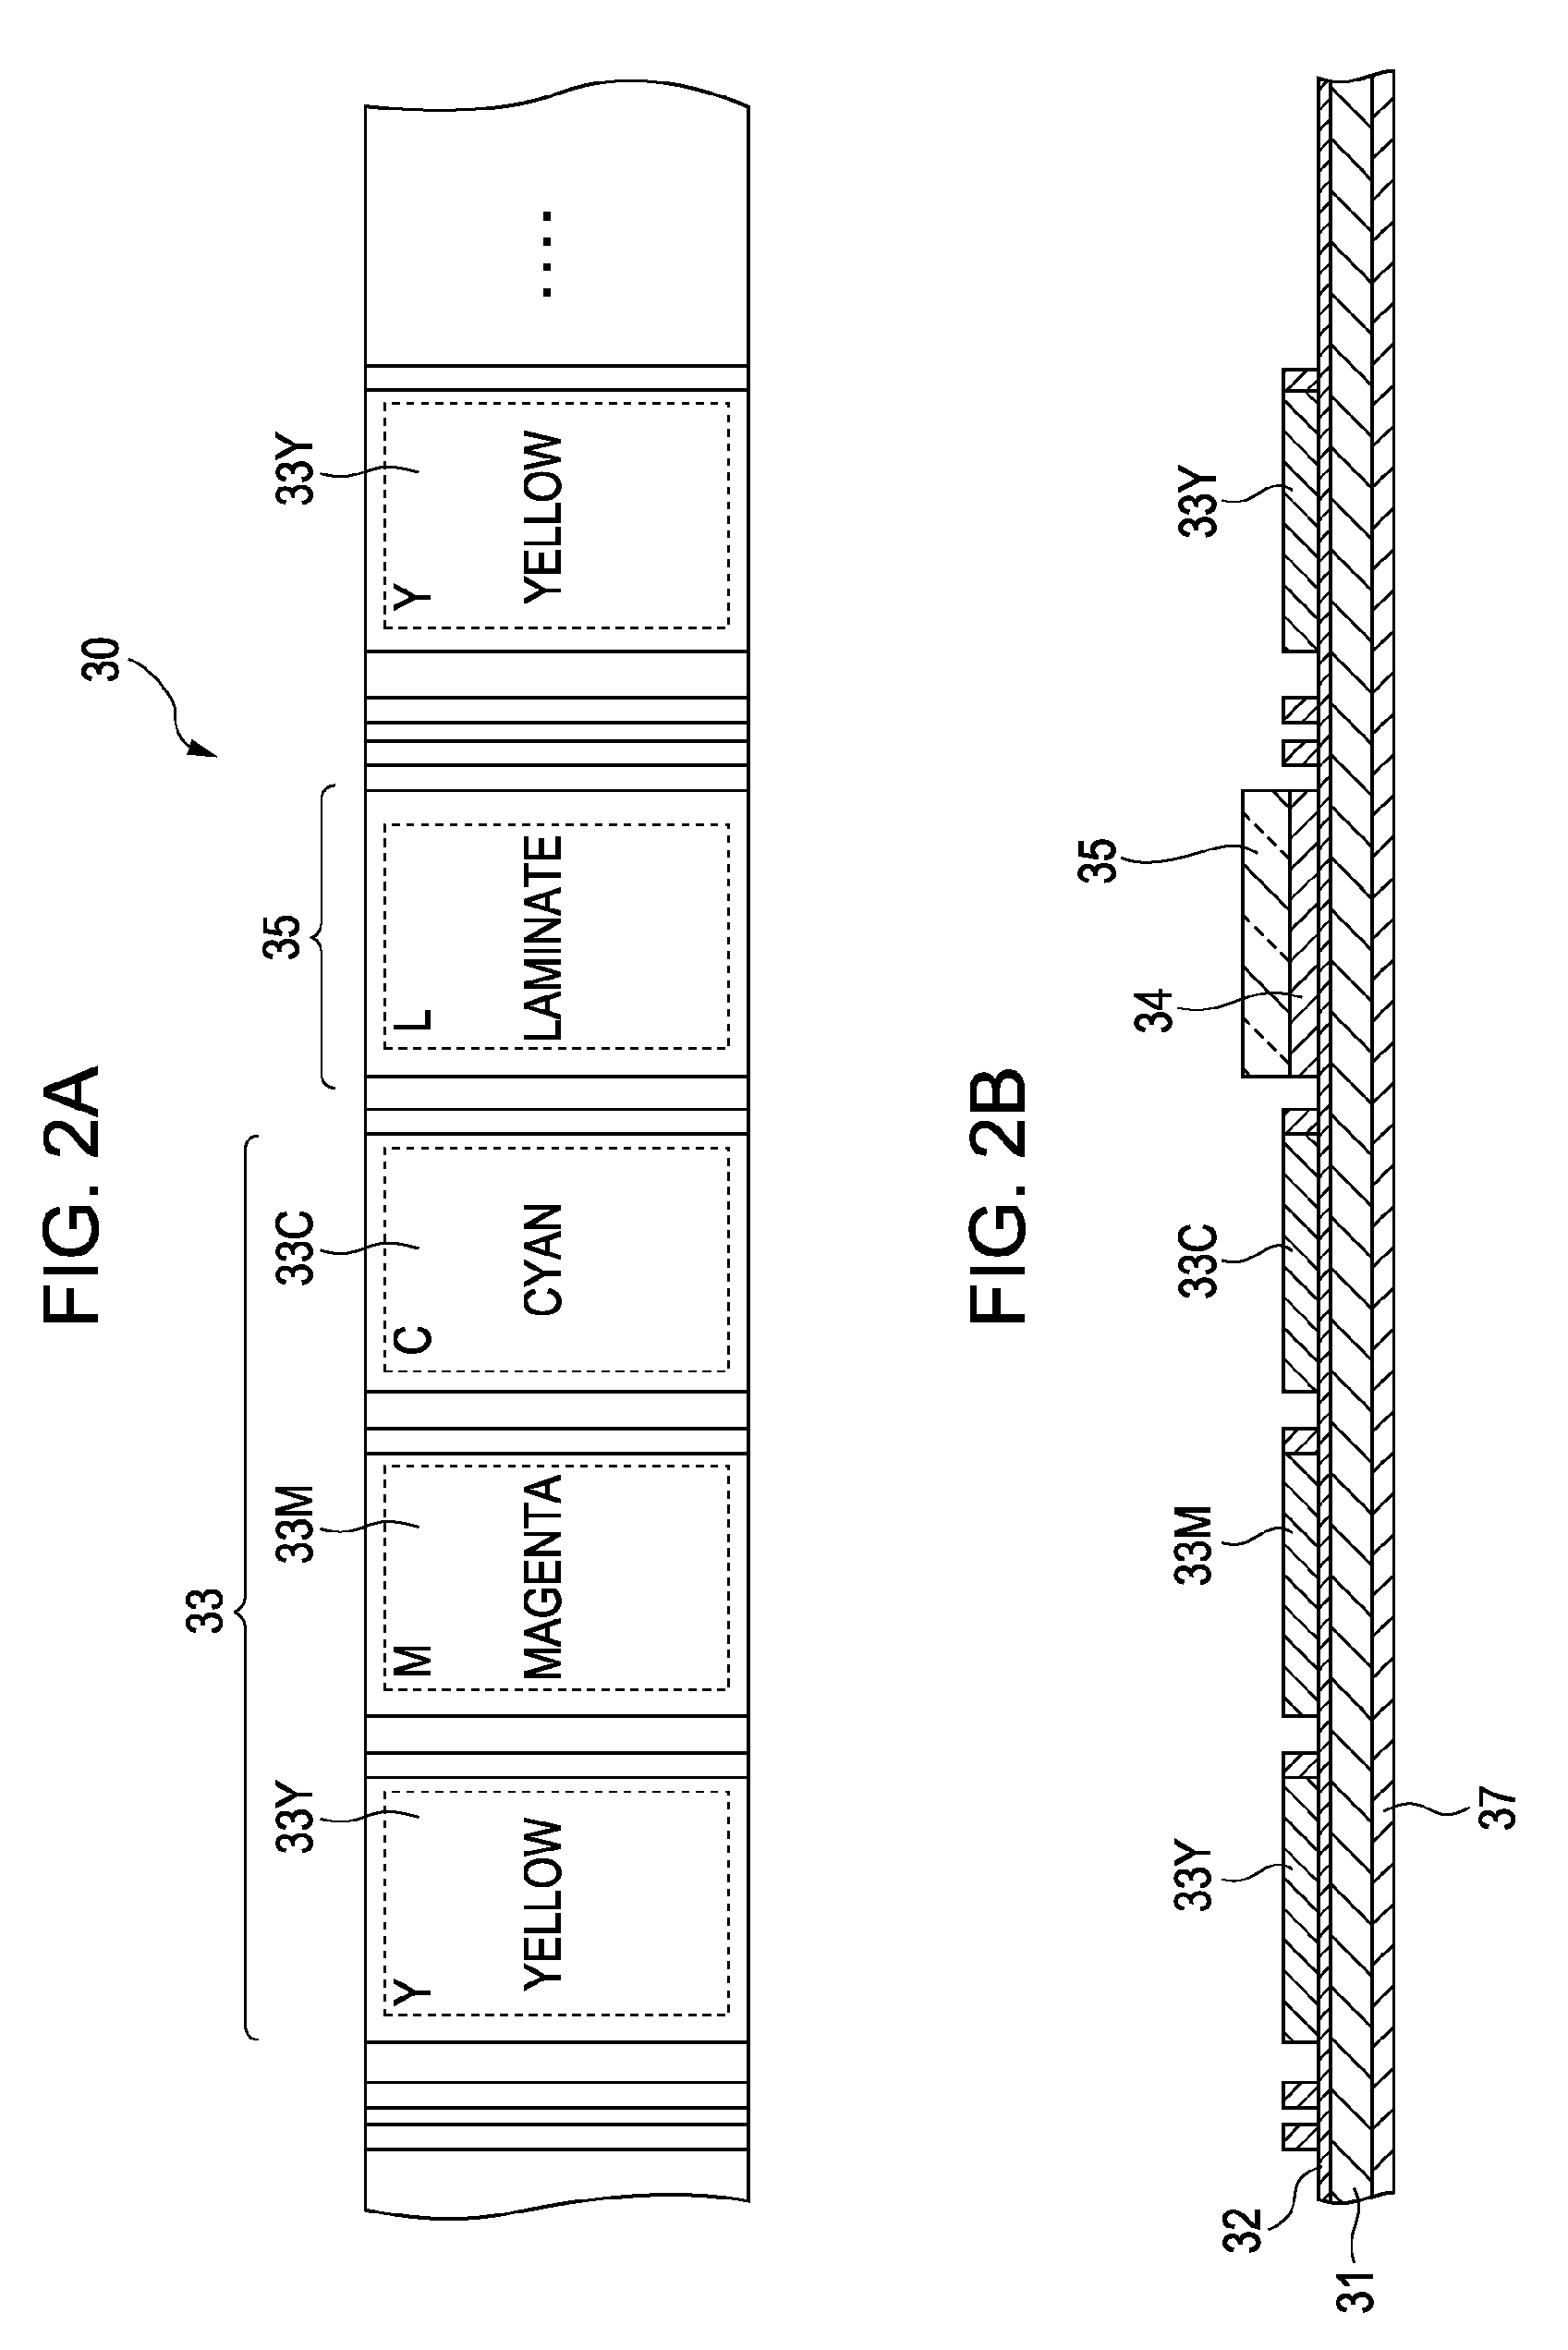 Image forming apparatus, surface property reforming sheet, and method for forming image